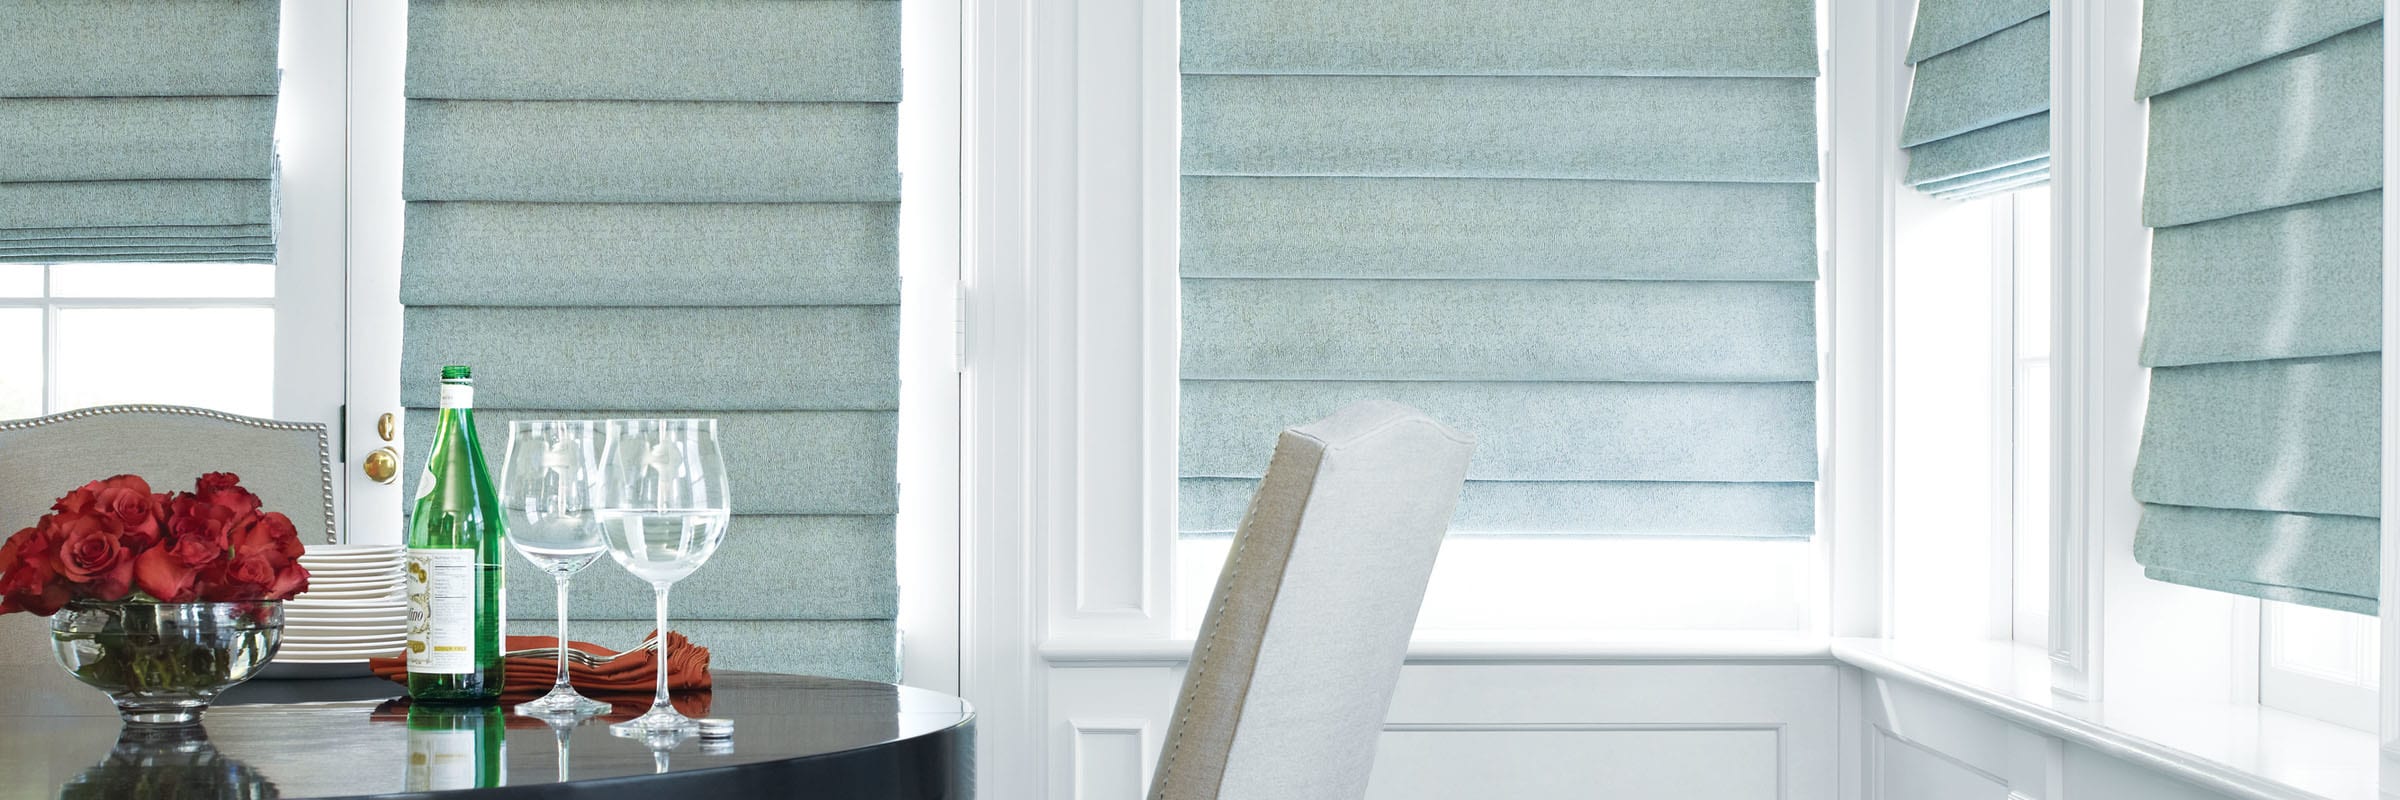 Luminette® Privacy Sheers For wide windows and sliding doors, our Luminette® Privacy Sheers come in an array of sheer and drapery-like fabrics for unlimited light-control and privacy options. Learn more about Luminette® Privacy Sheers.